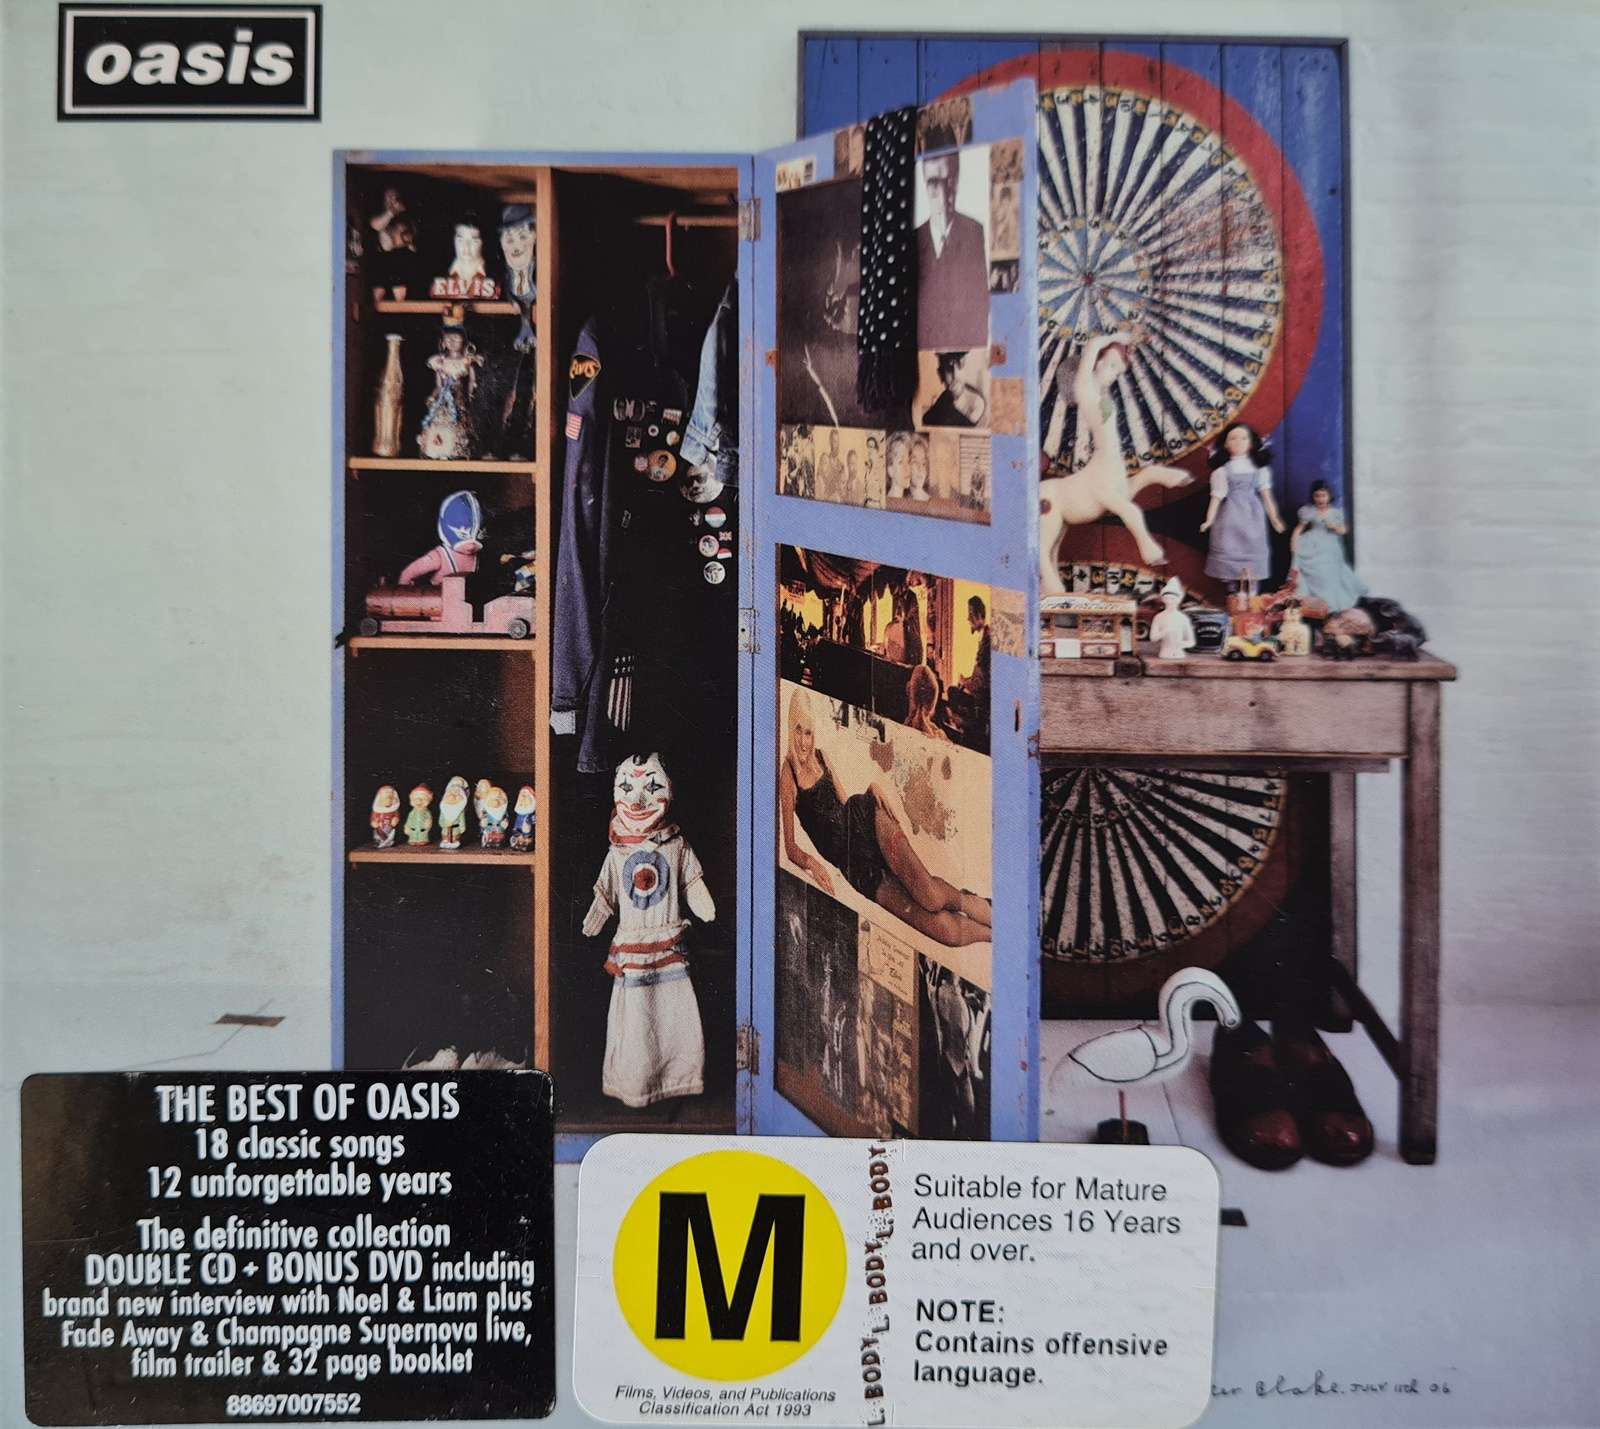 Oasis - Stop the Clocks Deluxe (CD) + DVD